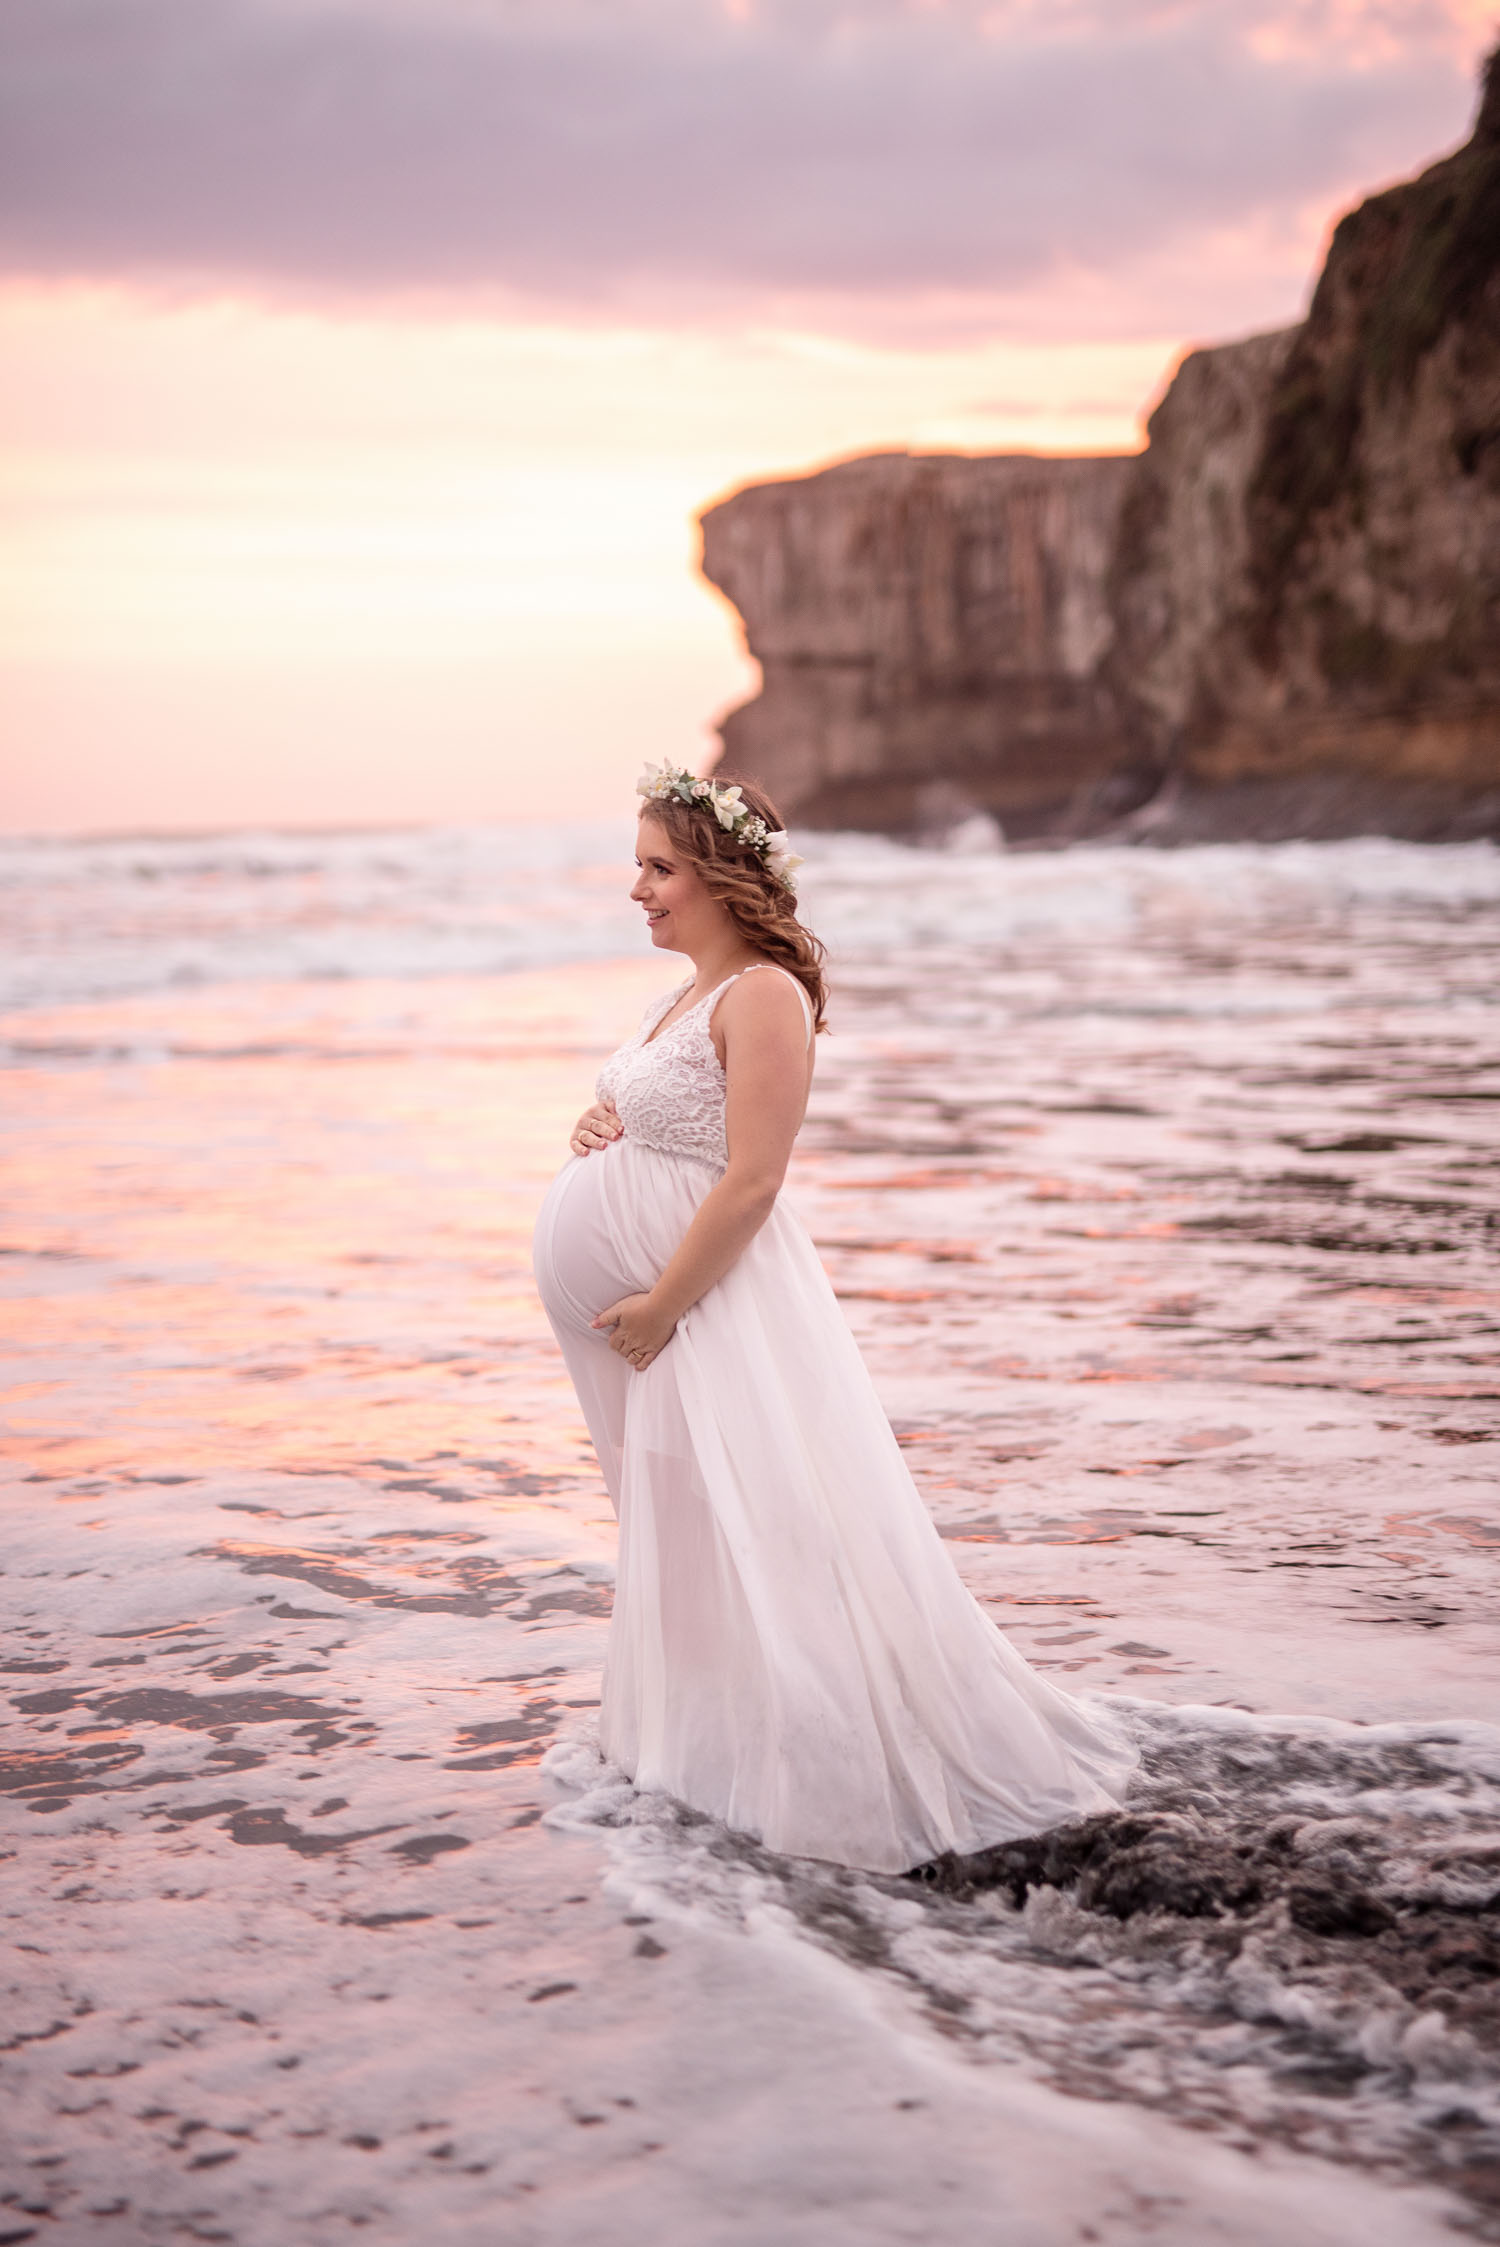 maternity photography at beach by siobhan kelly photography